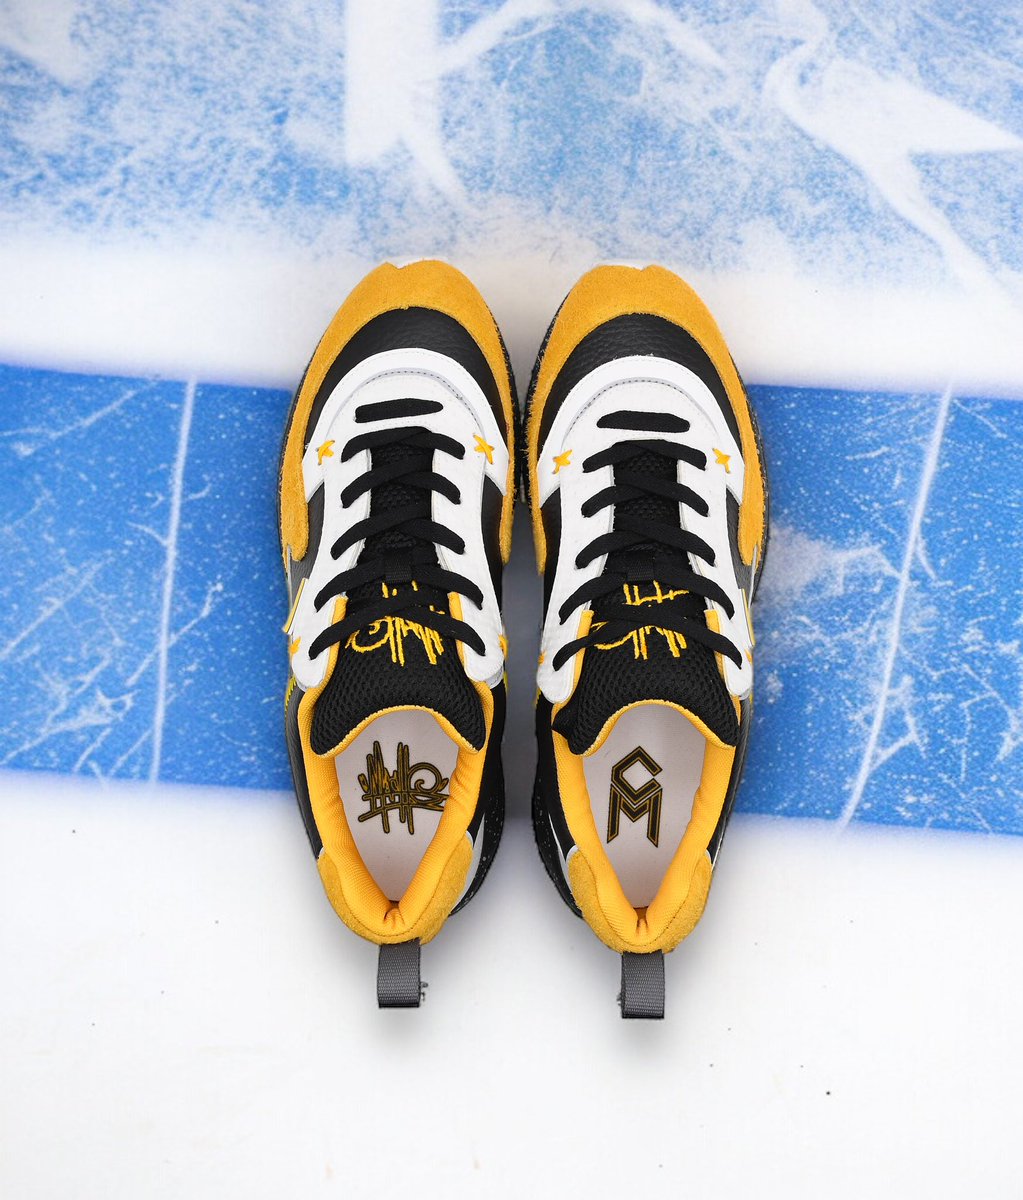 The remaining stock of the @CMcAvoy44 collaboration has now been loaded up on the site to purchase. Limited quantities left. Link: machecustoms.mybigcommerce.com/shop-all/